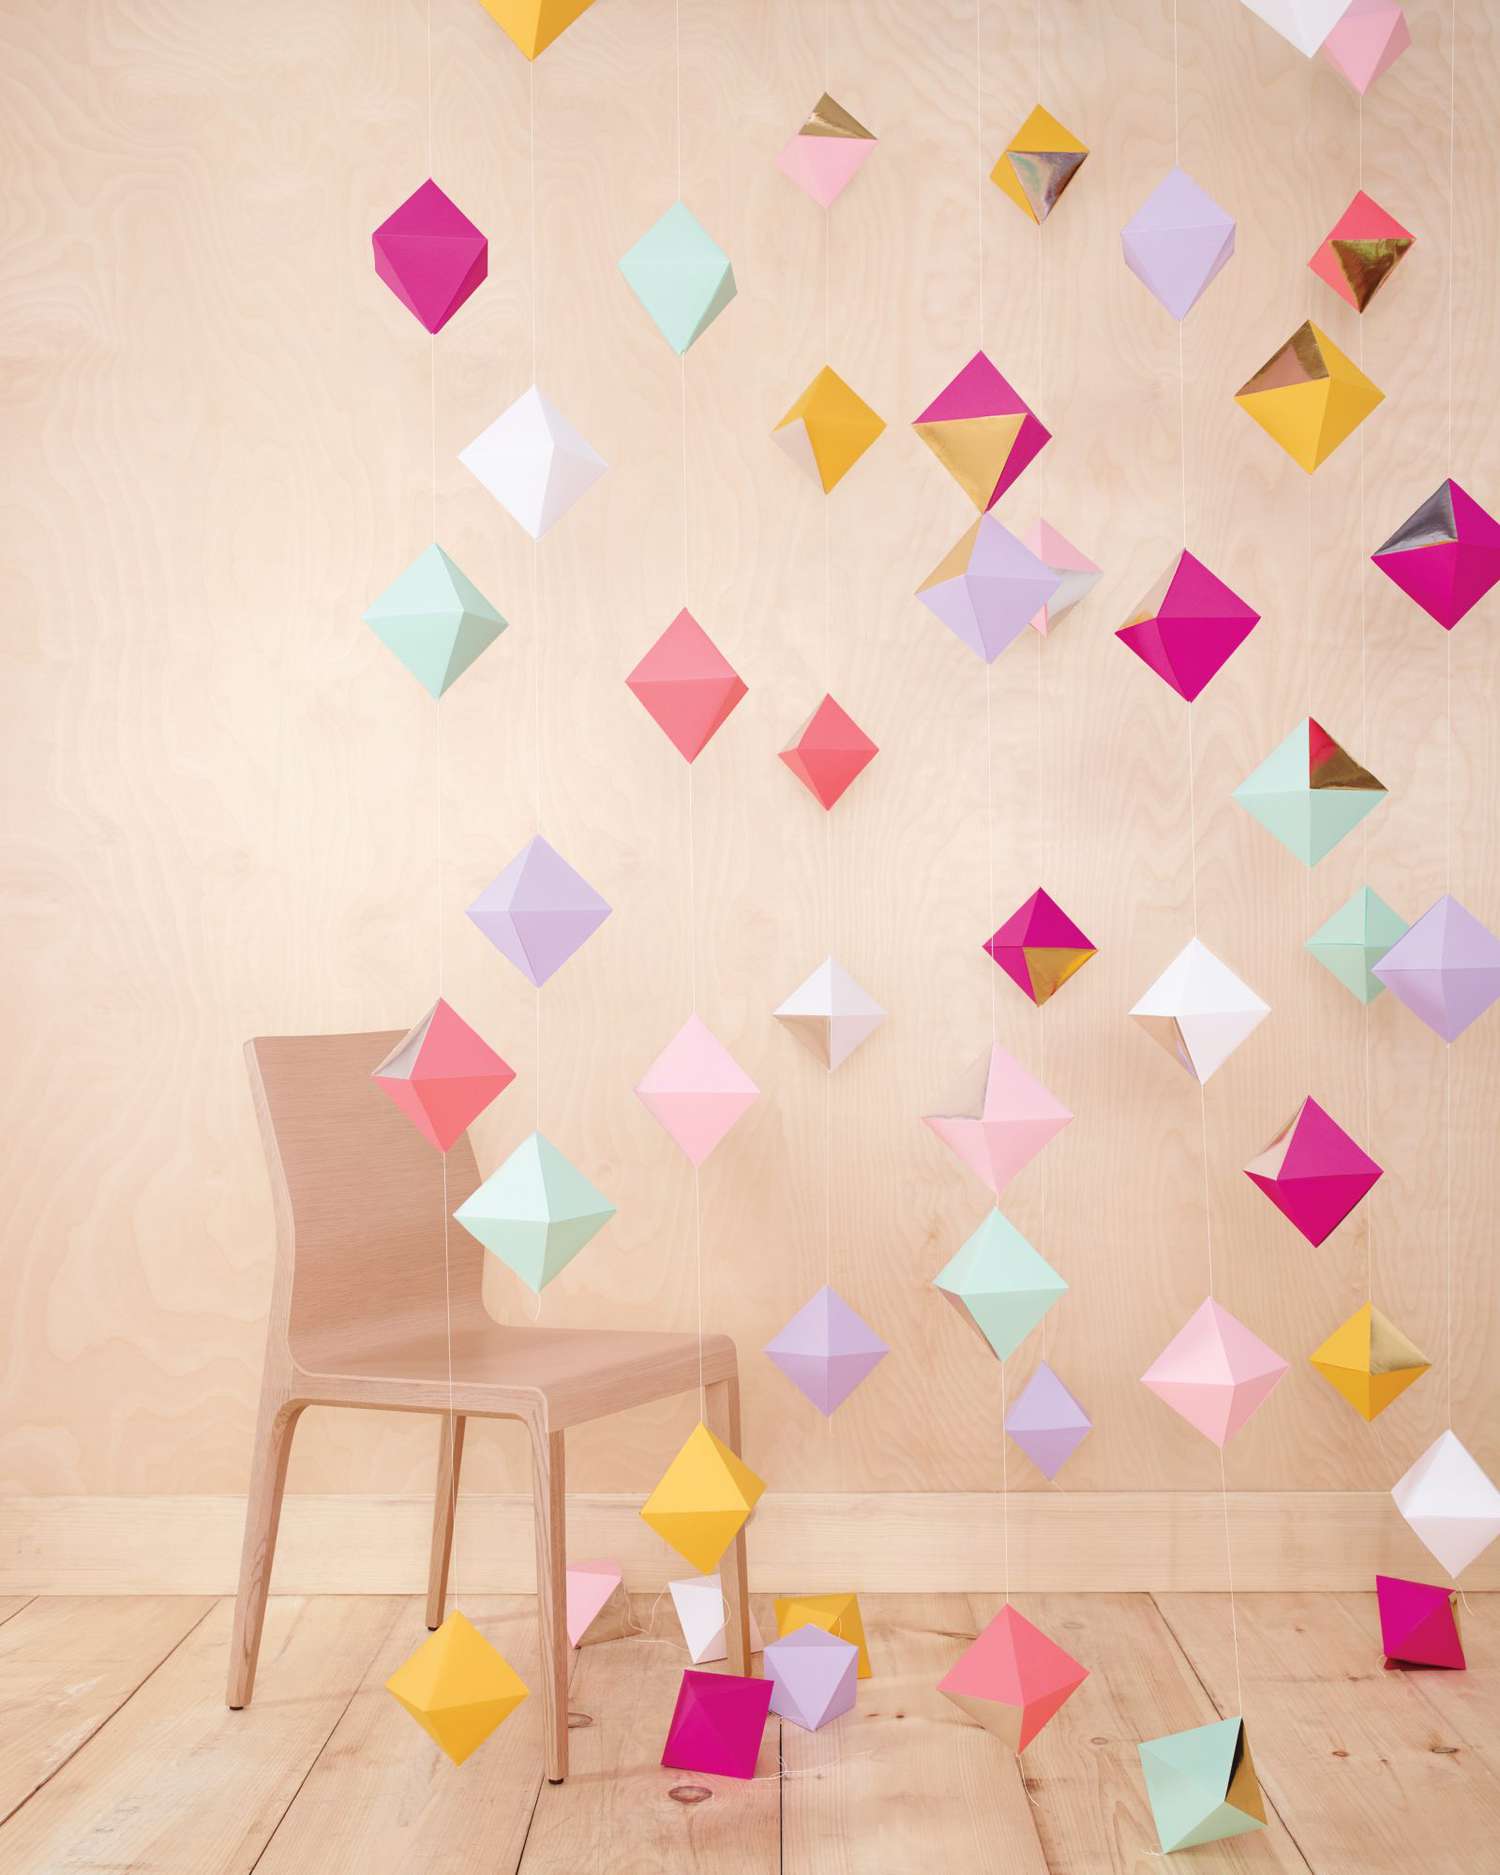 Hangnuo 50 PCS DIY Paper Origami Cranes Garland String with Silk Thread for Wedding Party Backdrop Home Decoration Mix Color